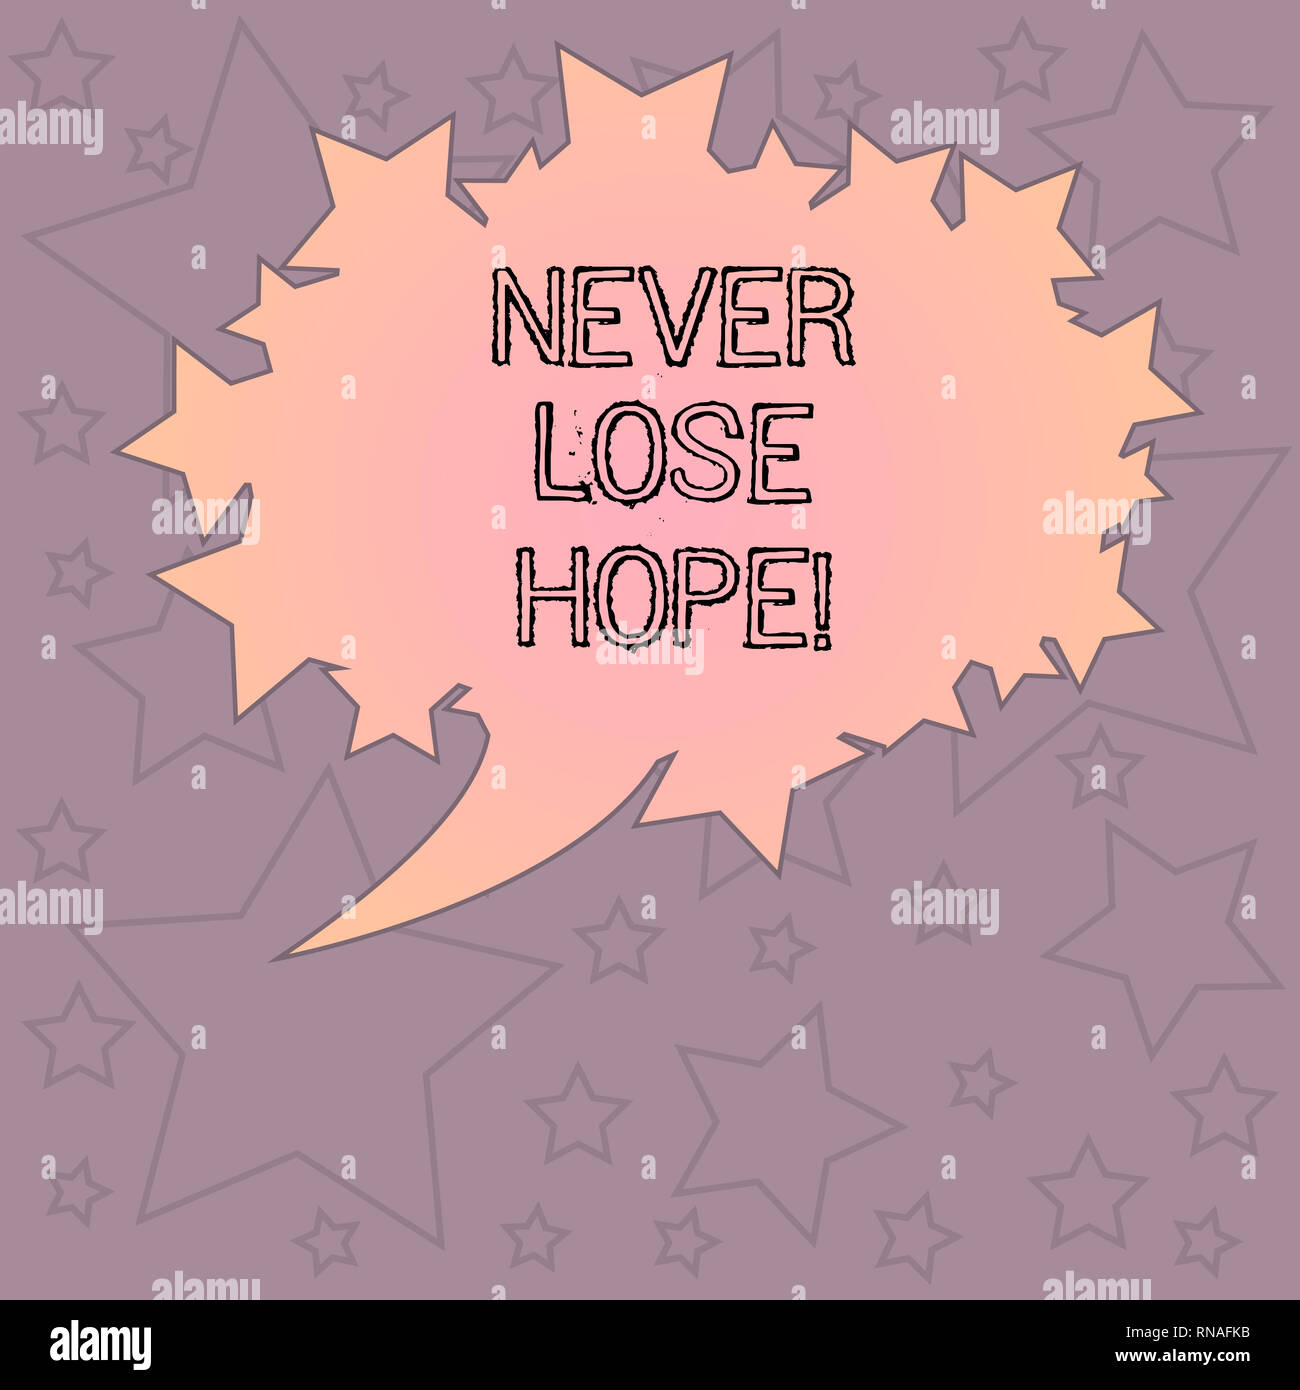 never lose hope